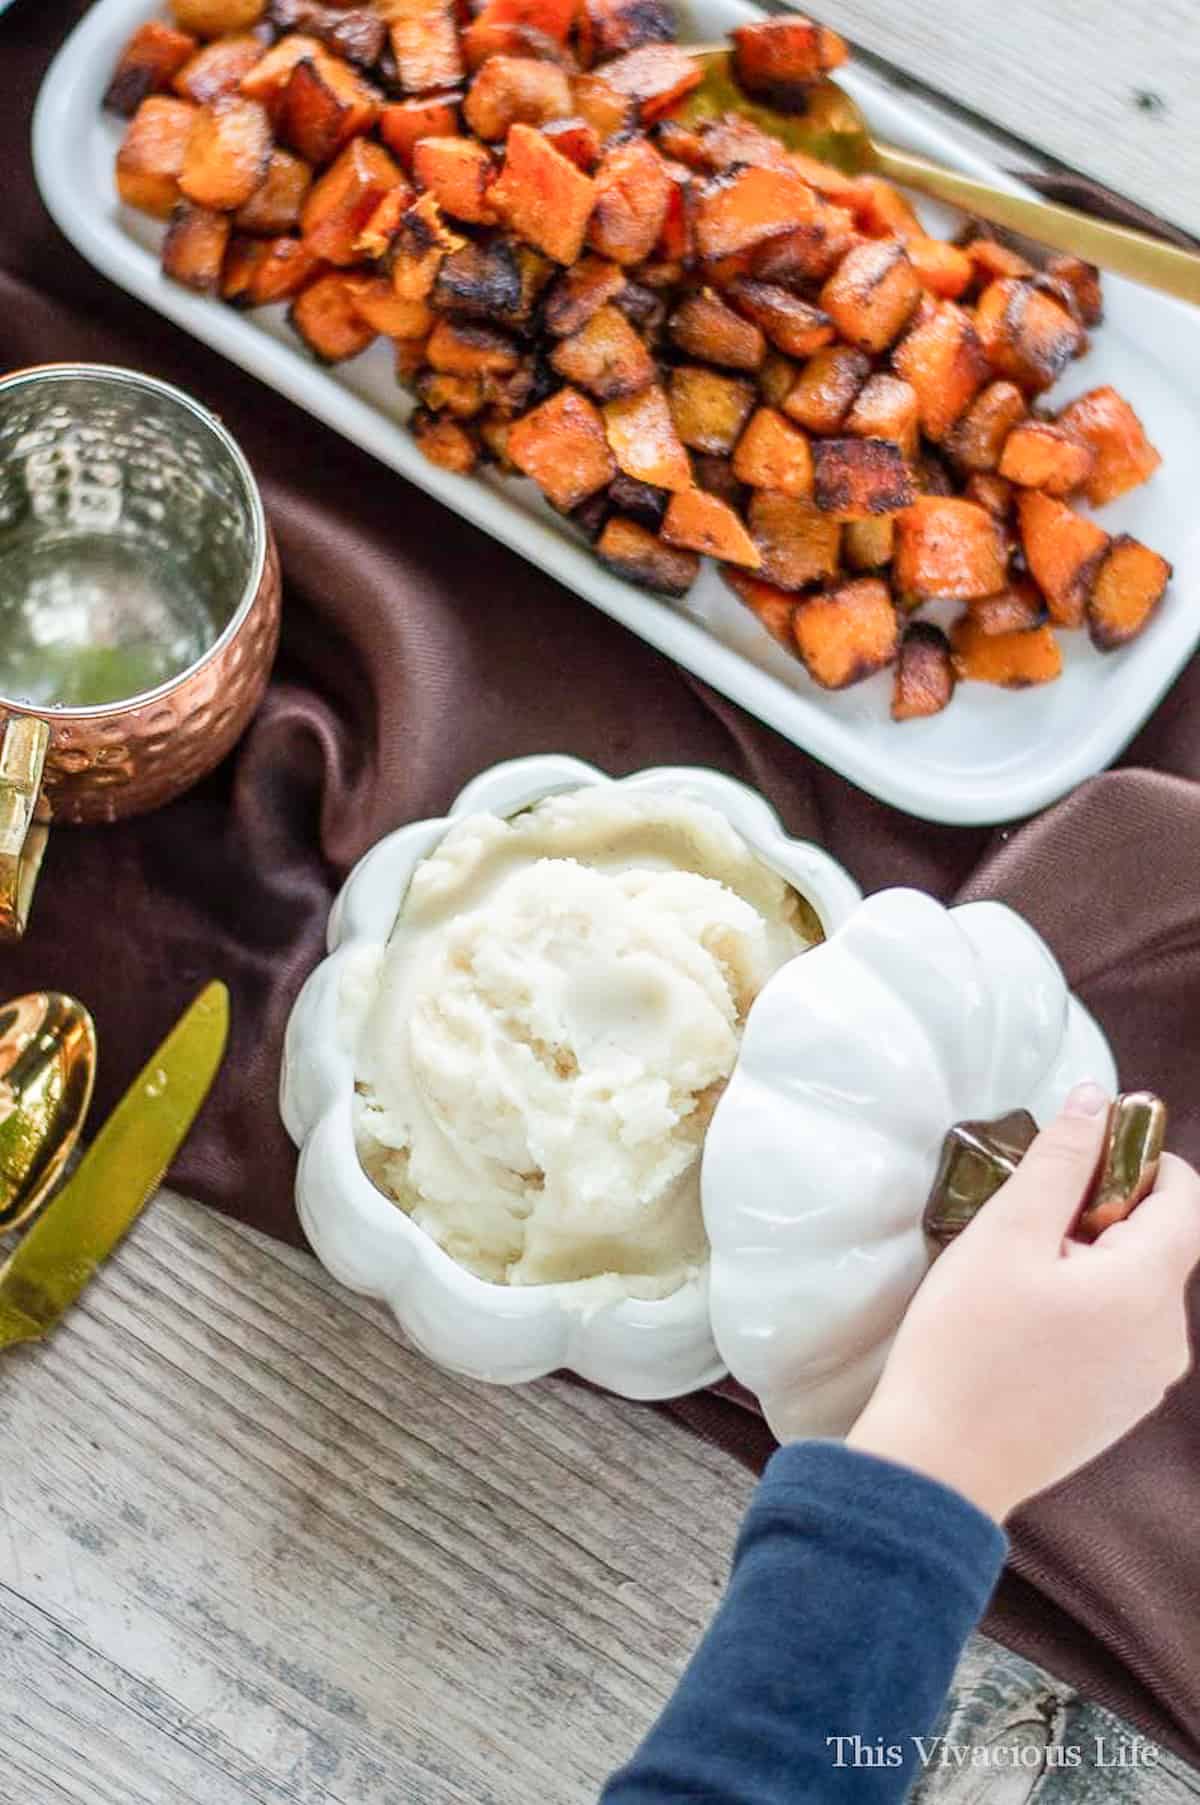 White pumpkin bowl with mashed potatoes inside